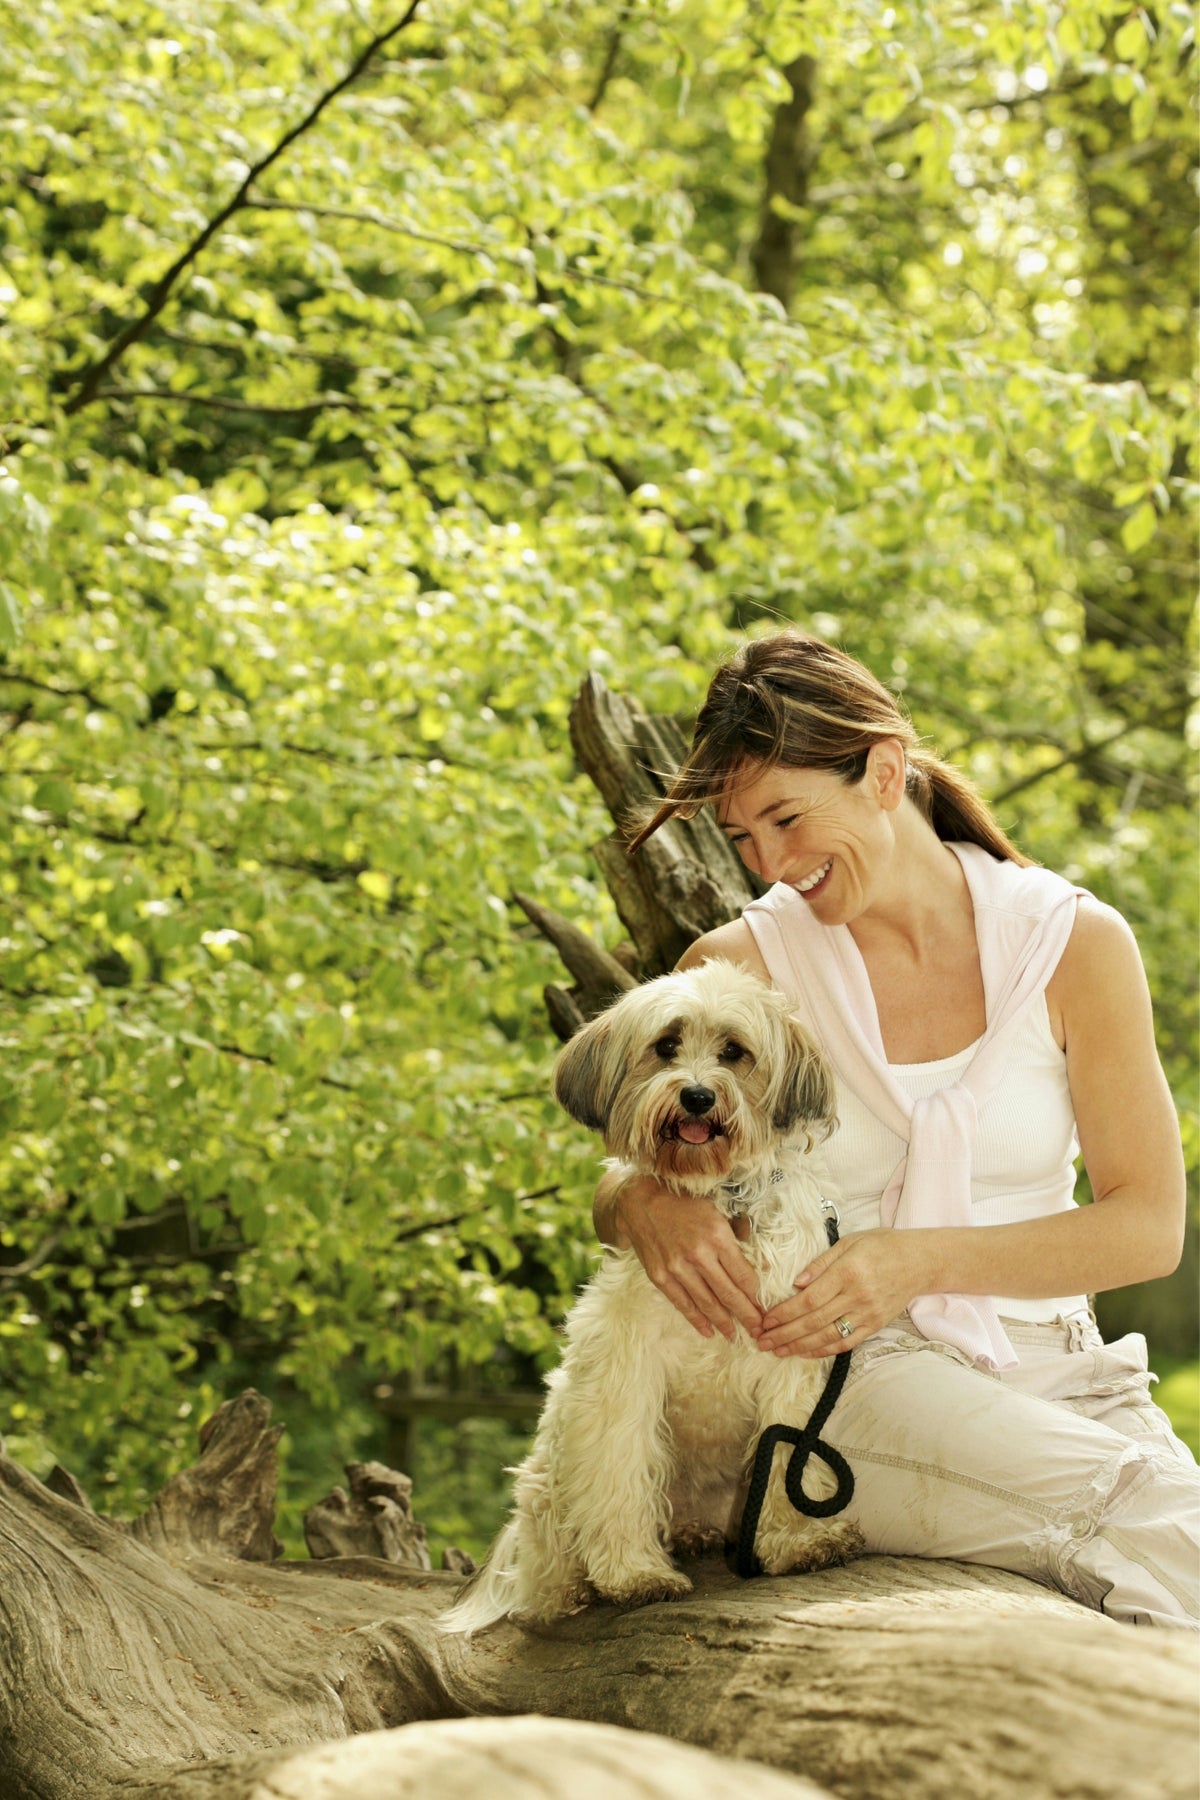 FUN THINGS YOU CAN DO WITH YOUR DOG THIS SPRING